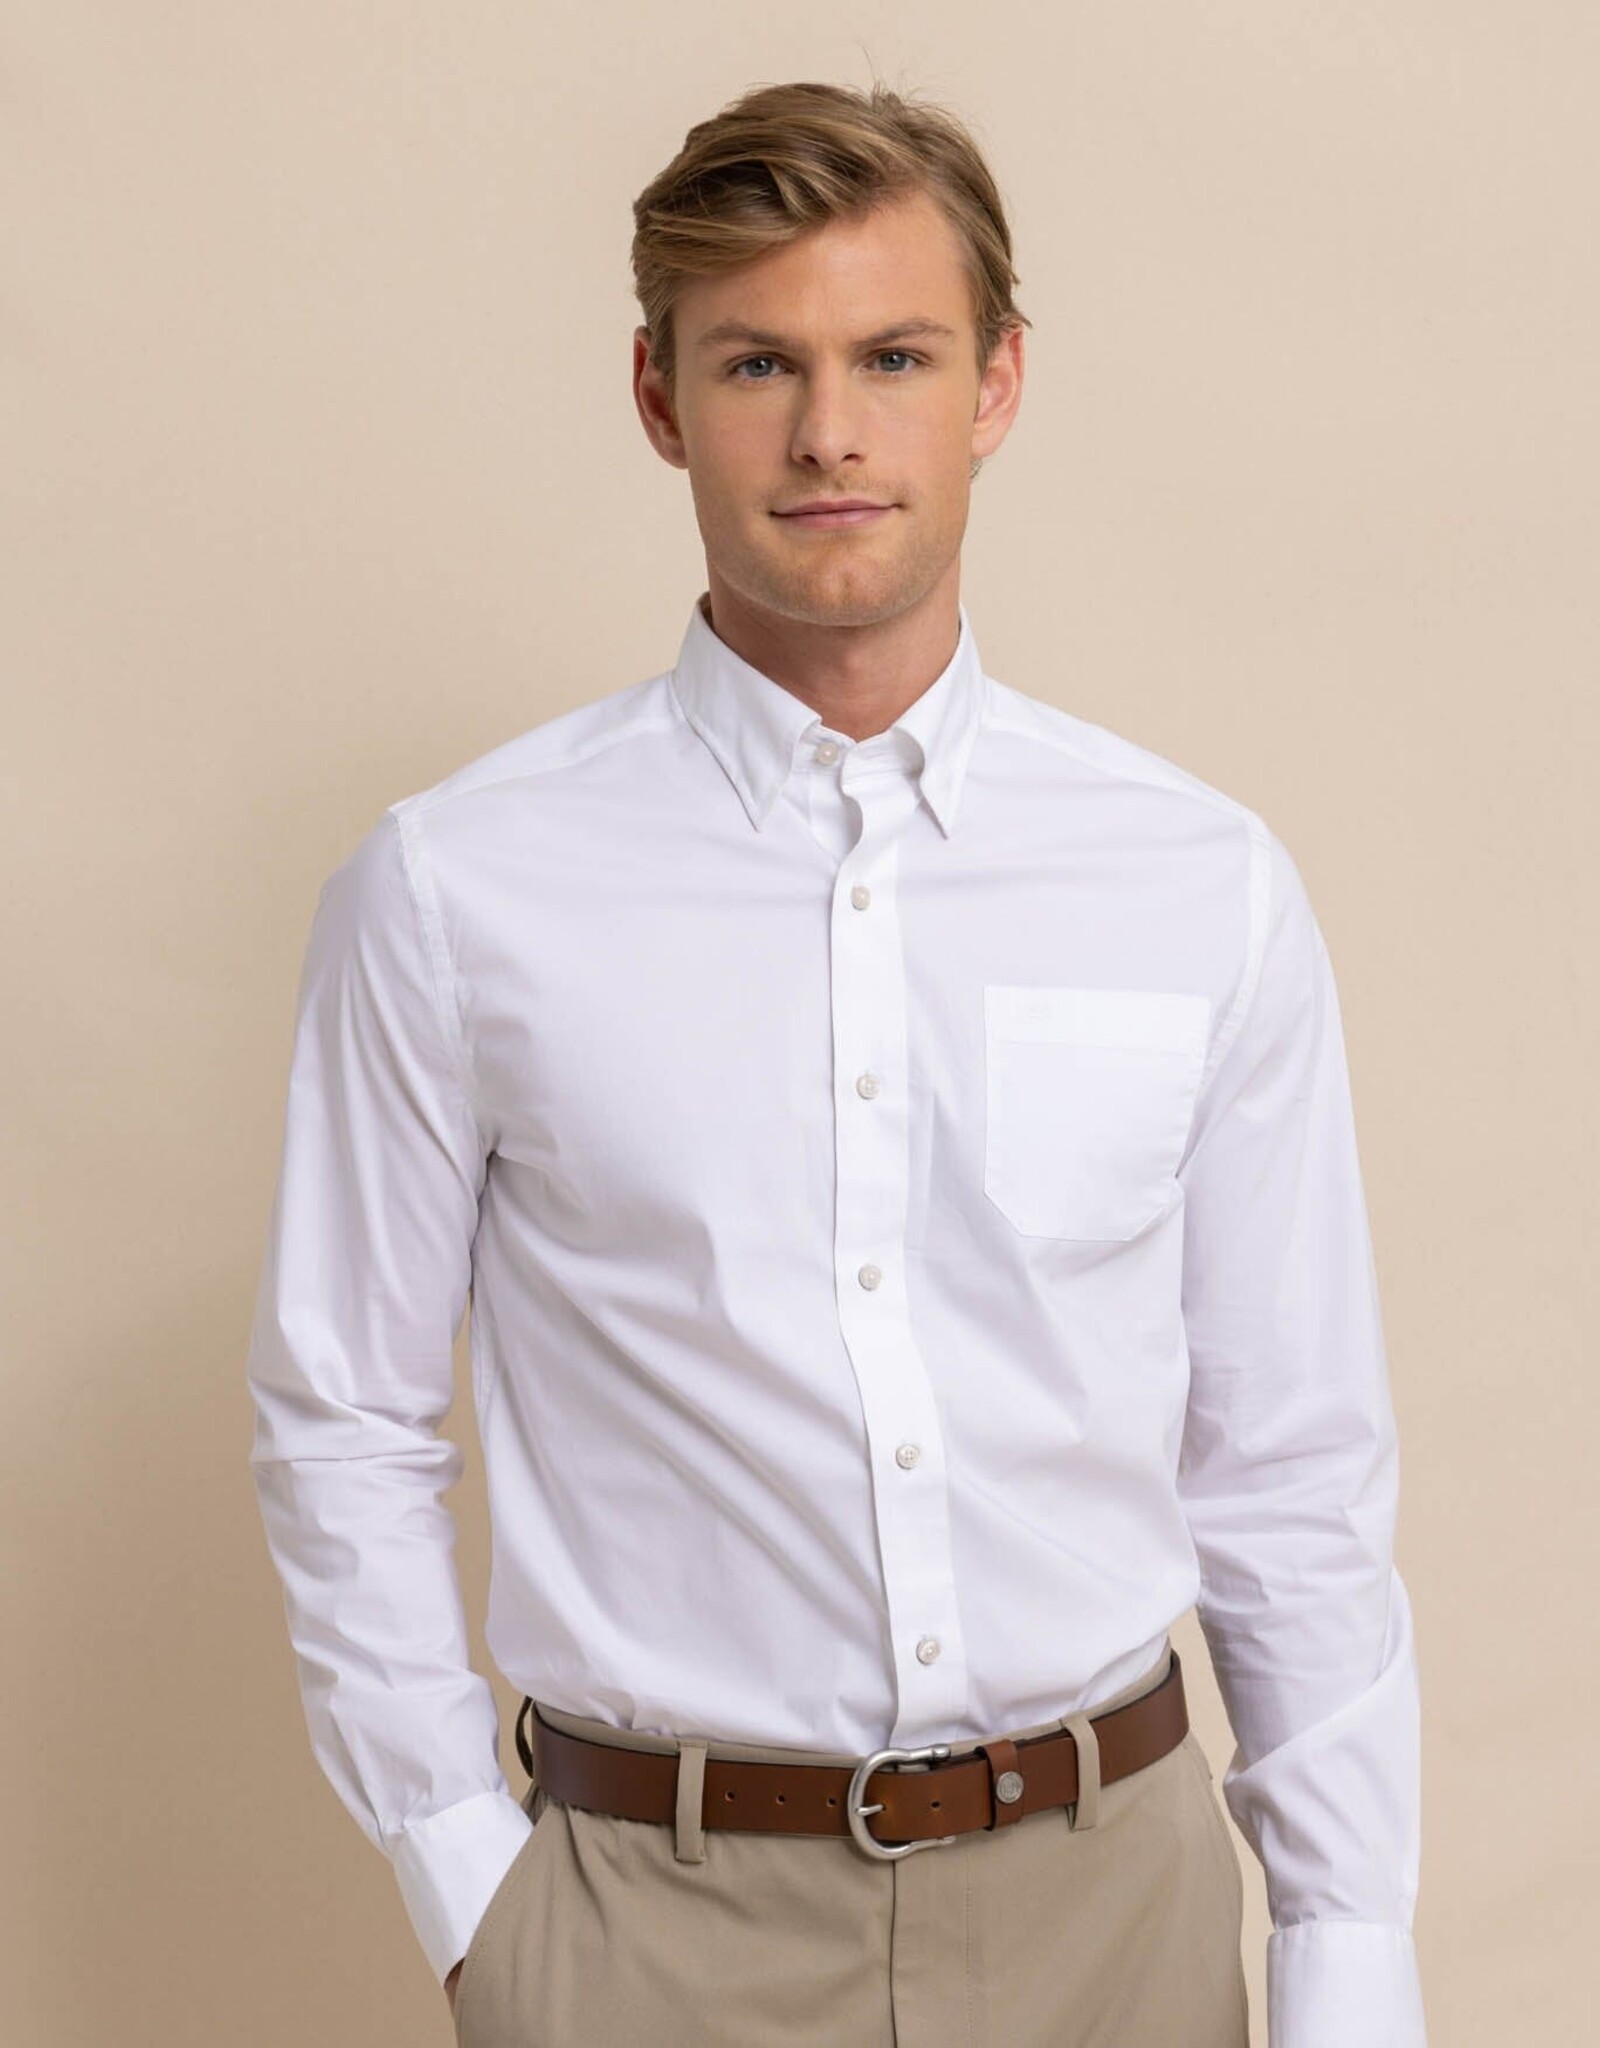 Southern Tide Charleston Overbrook Solid Sportshirt